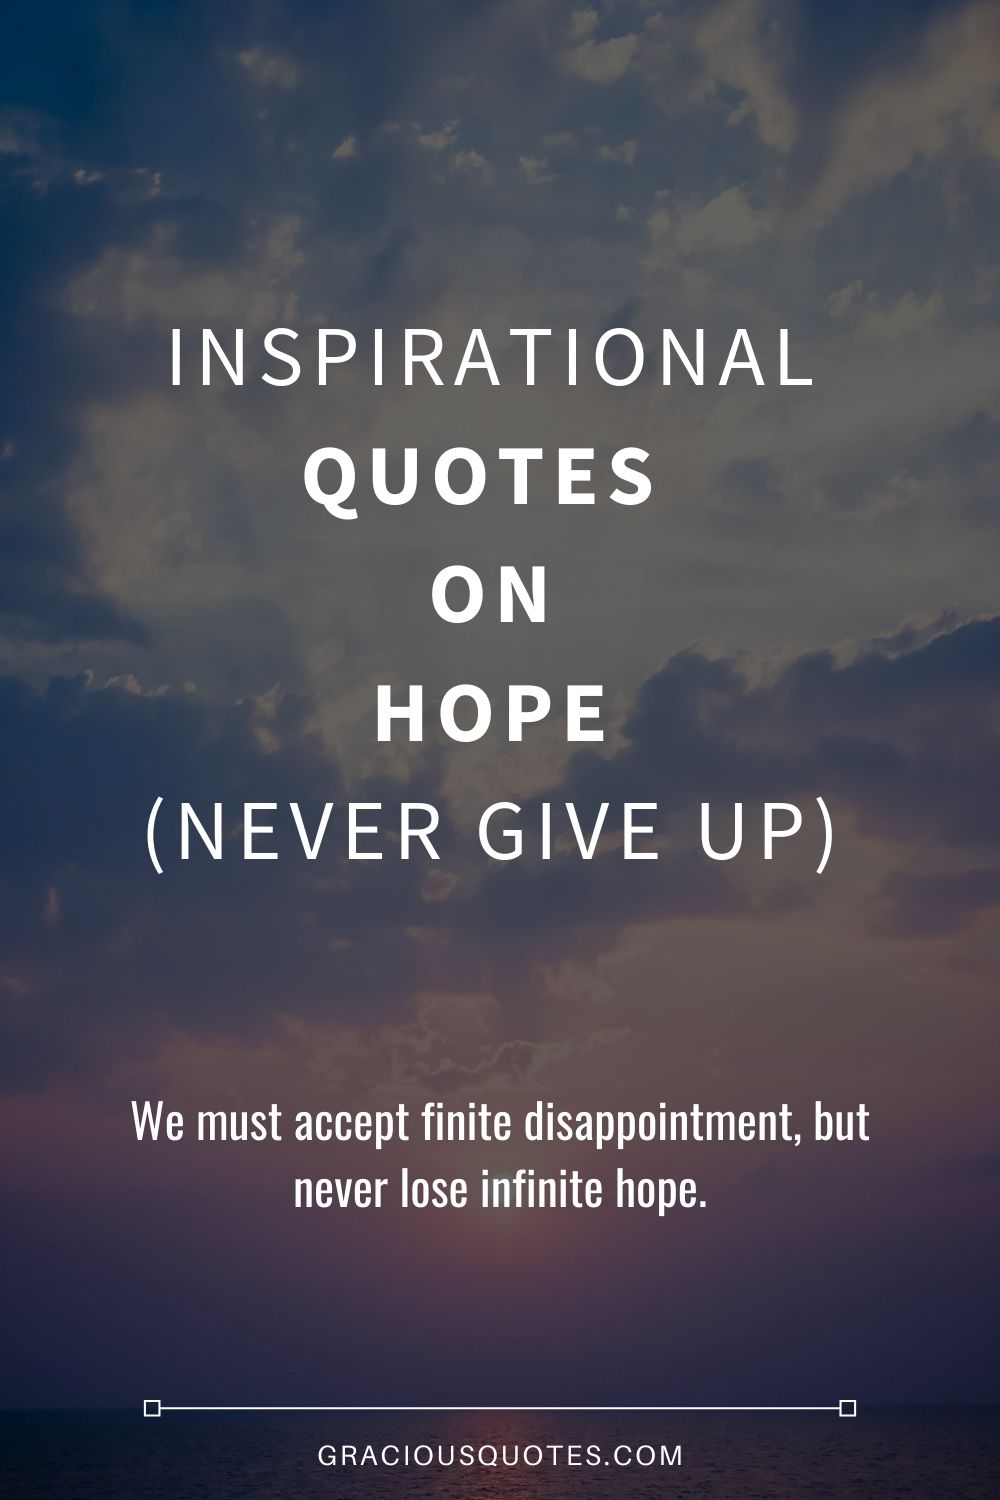 Inspirational Quotes About Hope And Courage